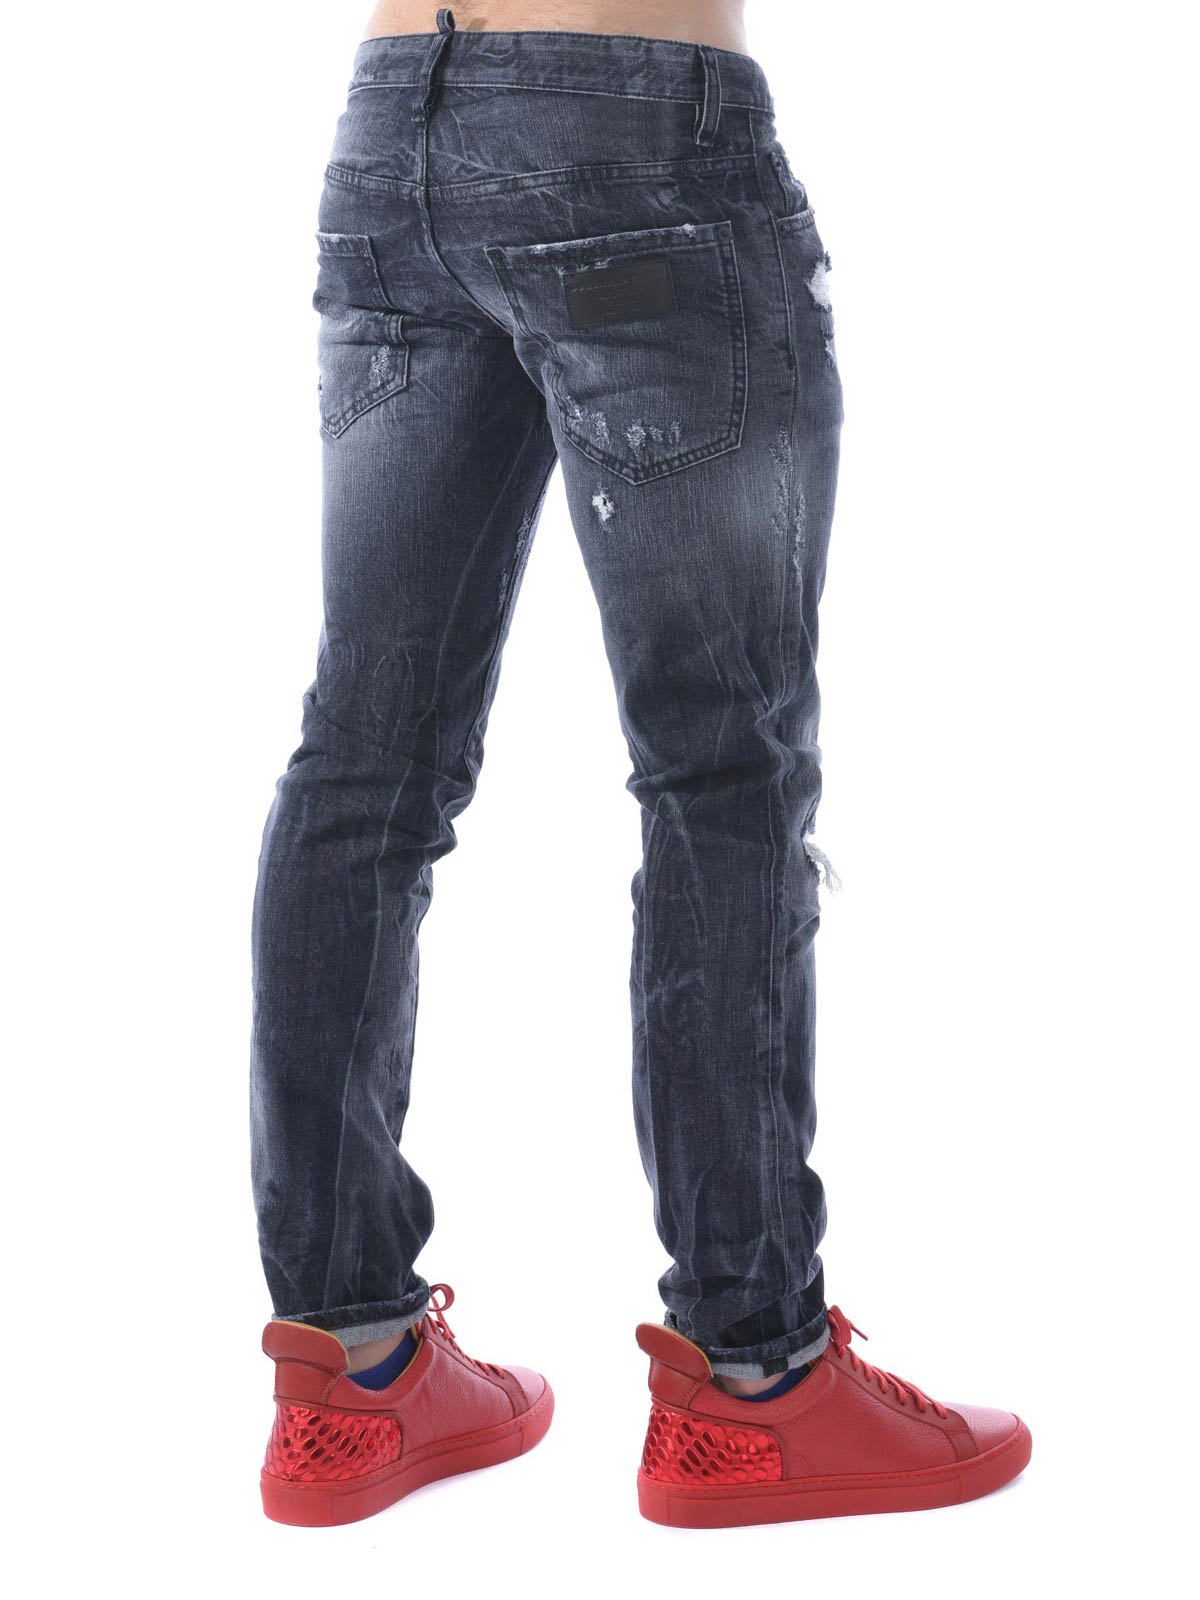 DSQUARED2 Clement Jeans 44 - パンツ